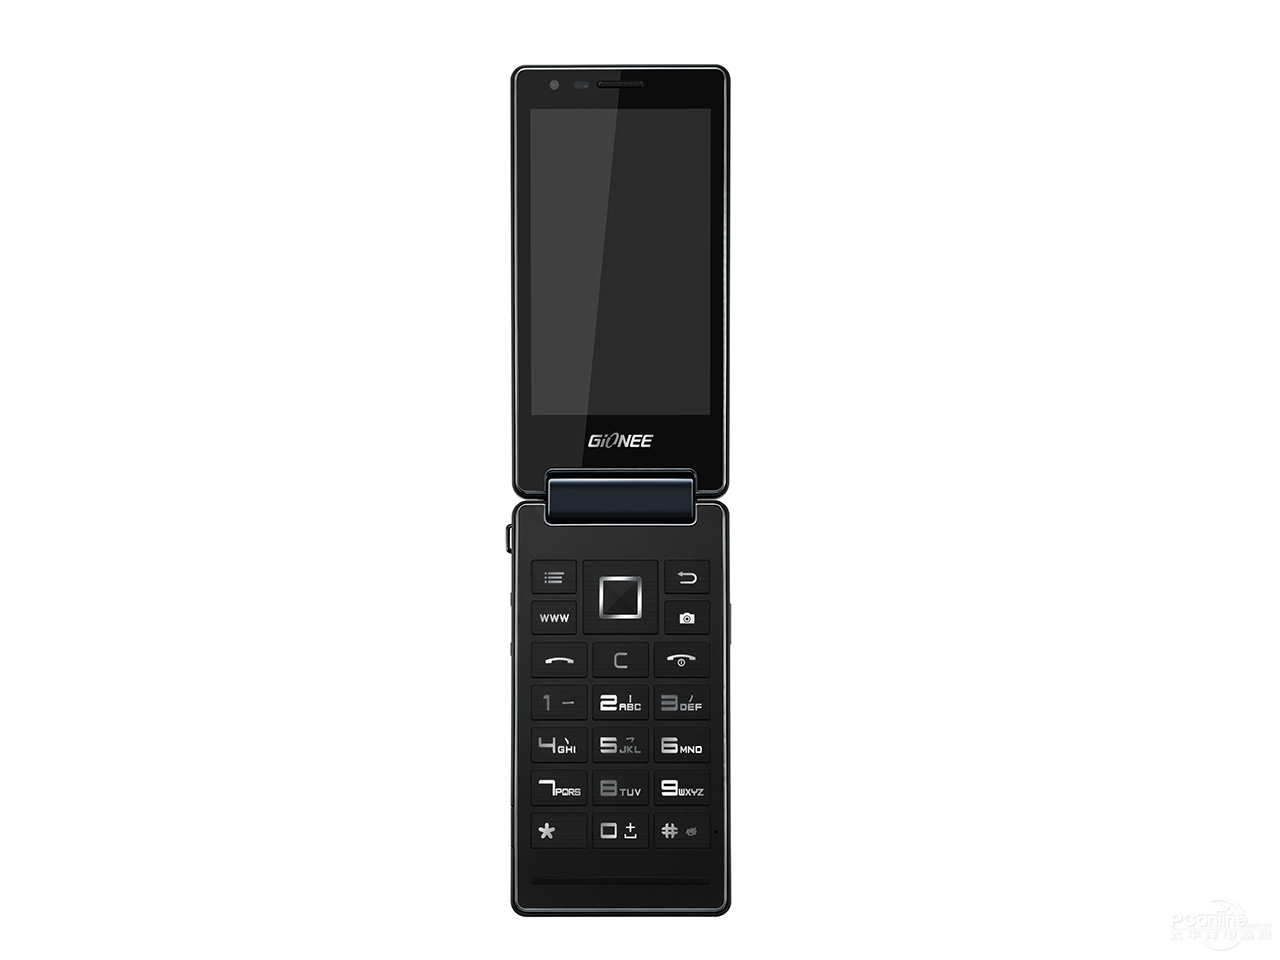 Gionee W800 front view